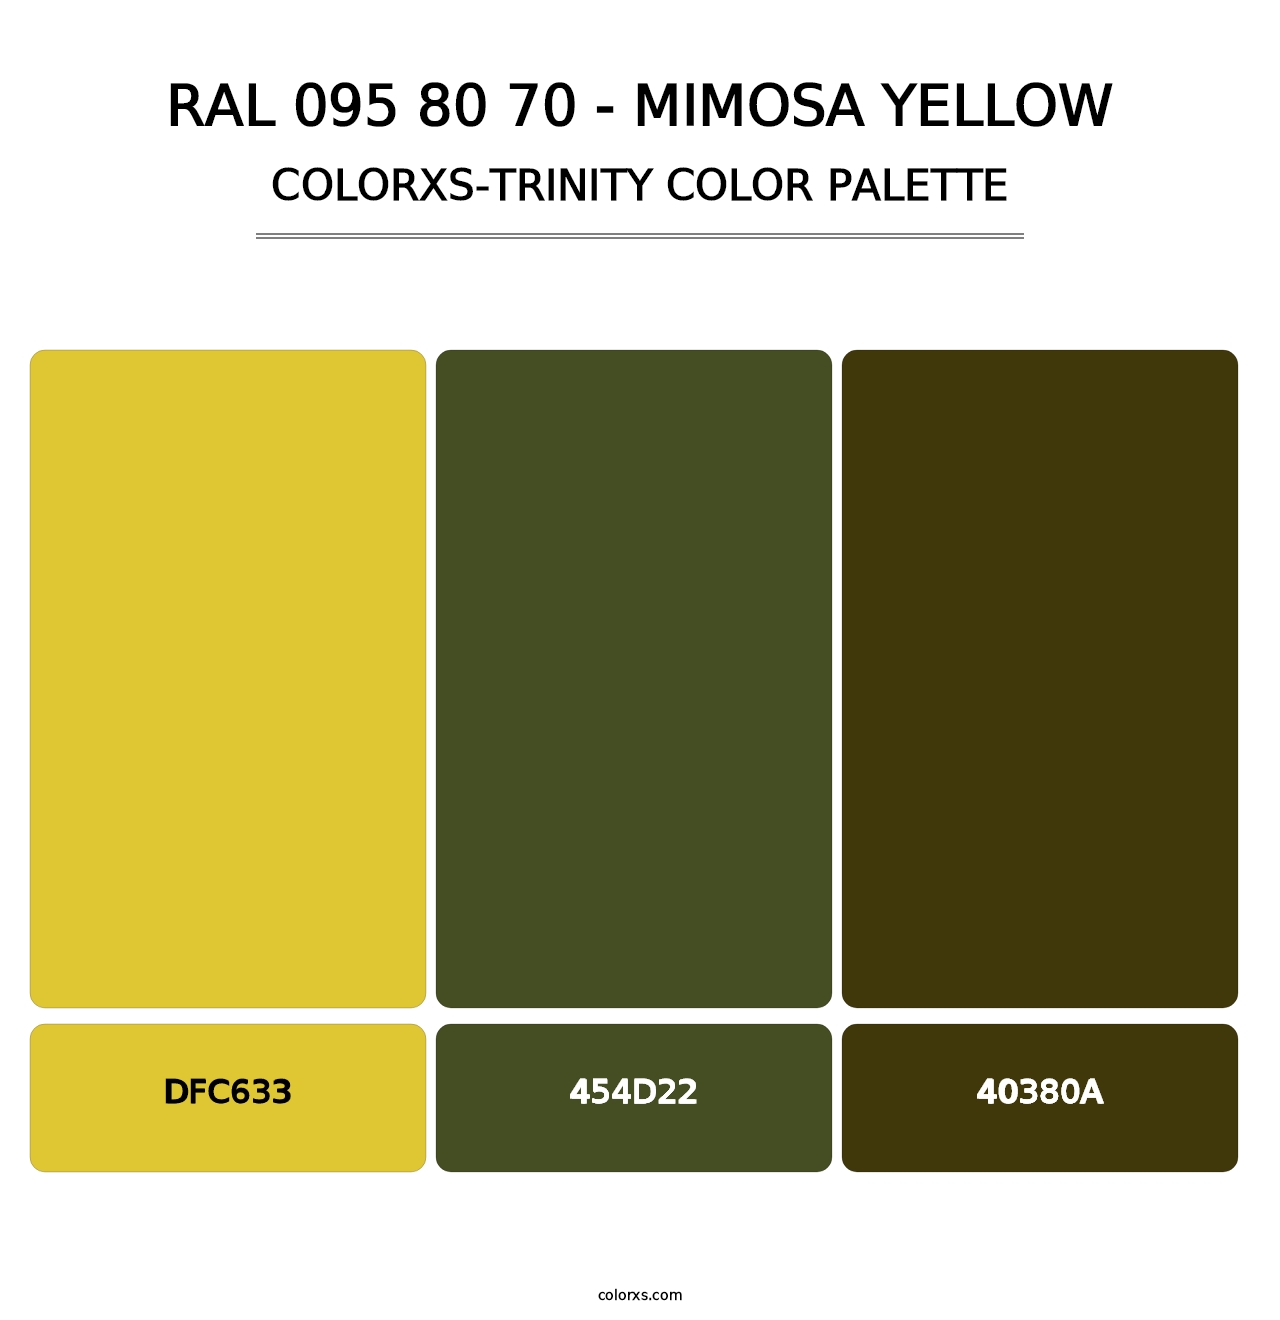 RAL 095 80 70 - Mimosa Yellow - Colorxs Trinity Palette